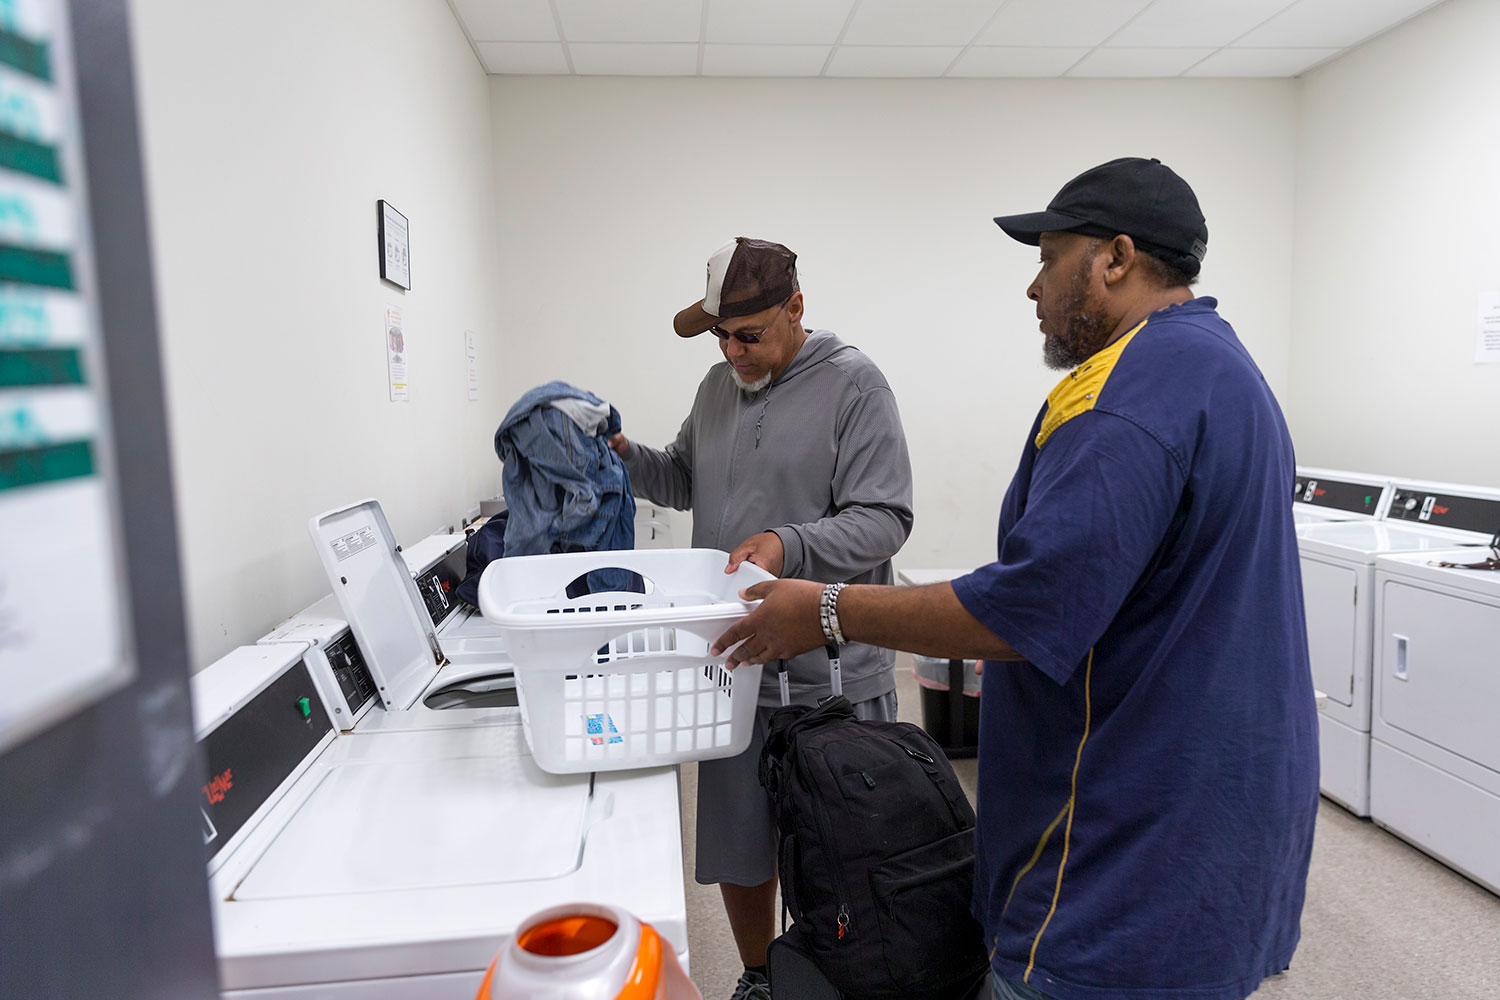 Basic Needs Coordinator Otis Whitaker, right, helps a guest in the laundry facility.